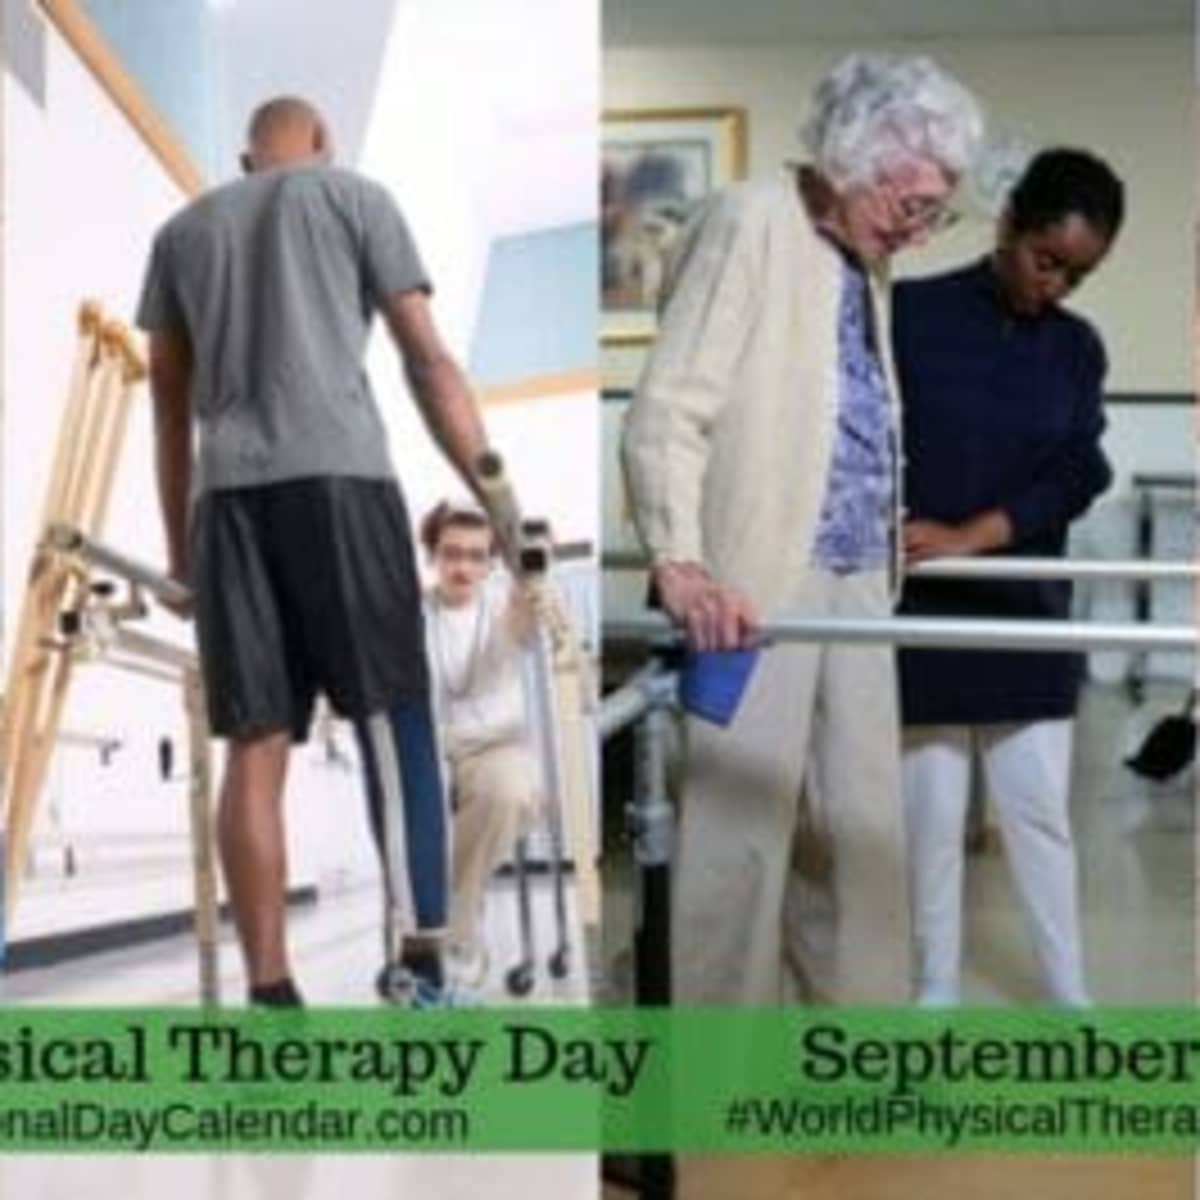 Day to Day Physical Therapy